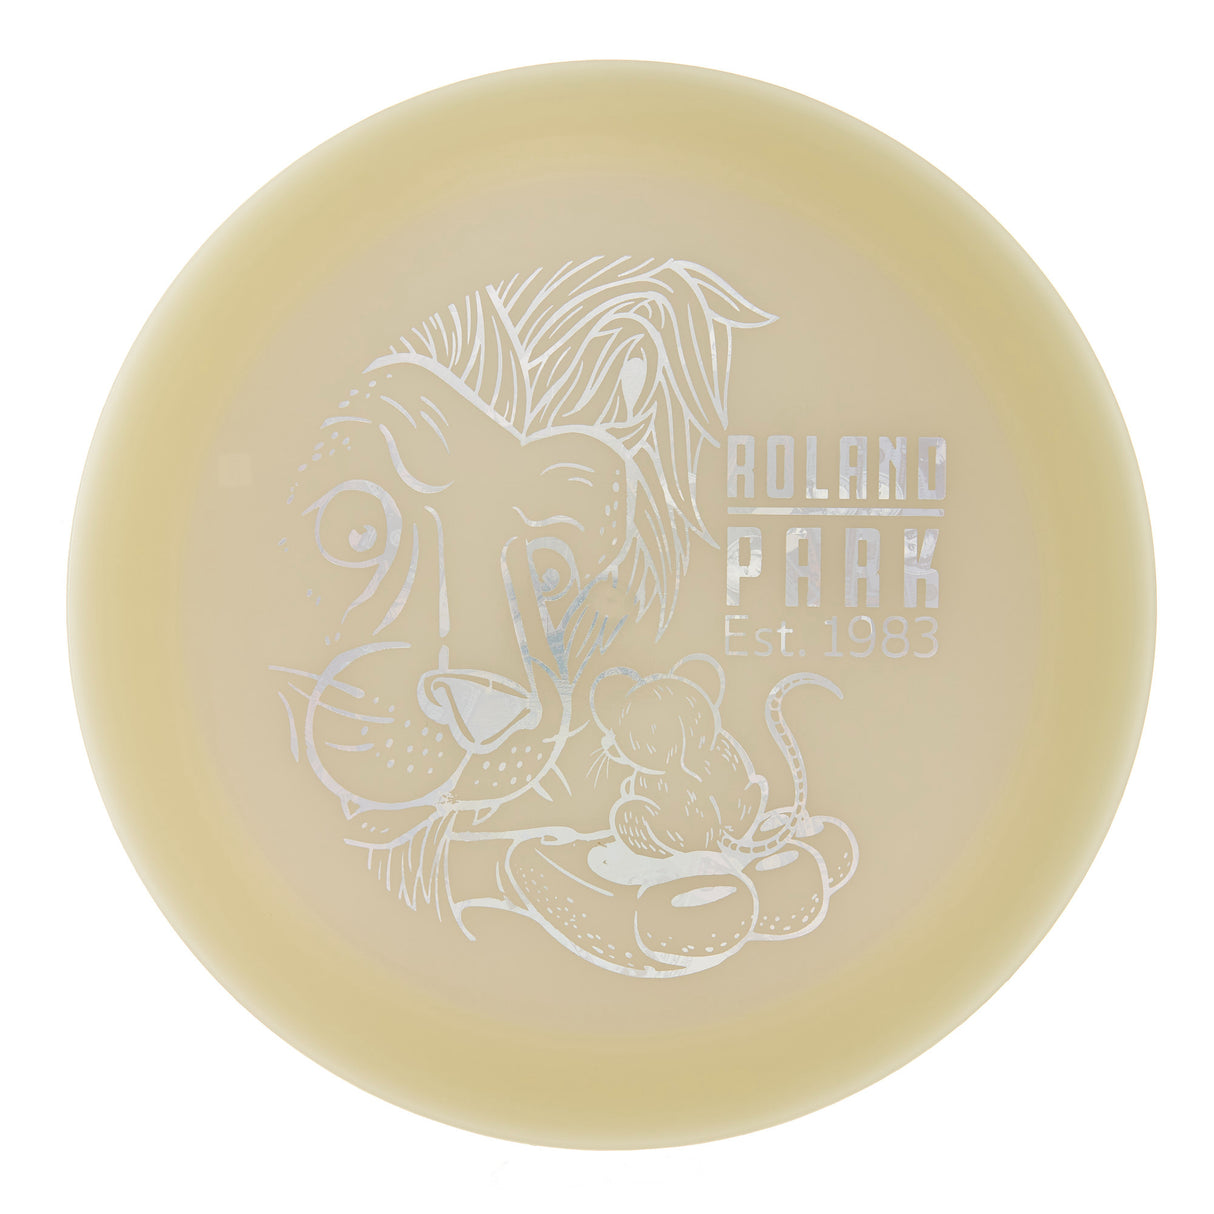 Thought Space Athletics Synapse - 2023 Roland Park Fundraiser Glow 178g | Style 0002